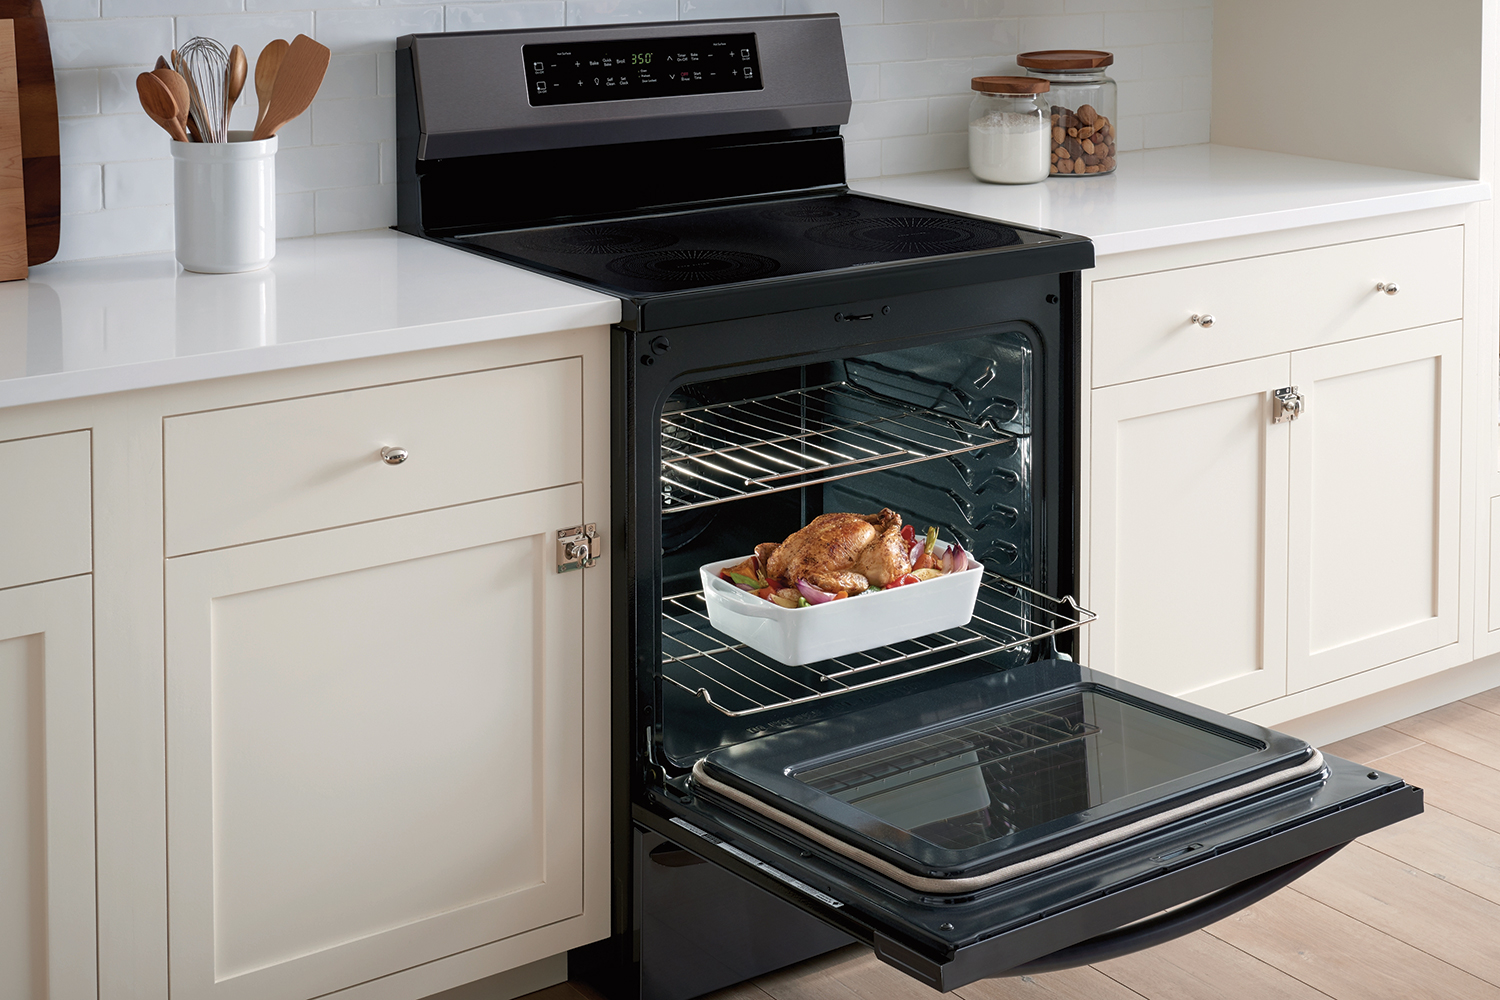 Best oven deals for July 2022